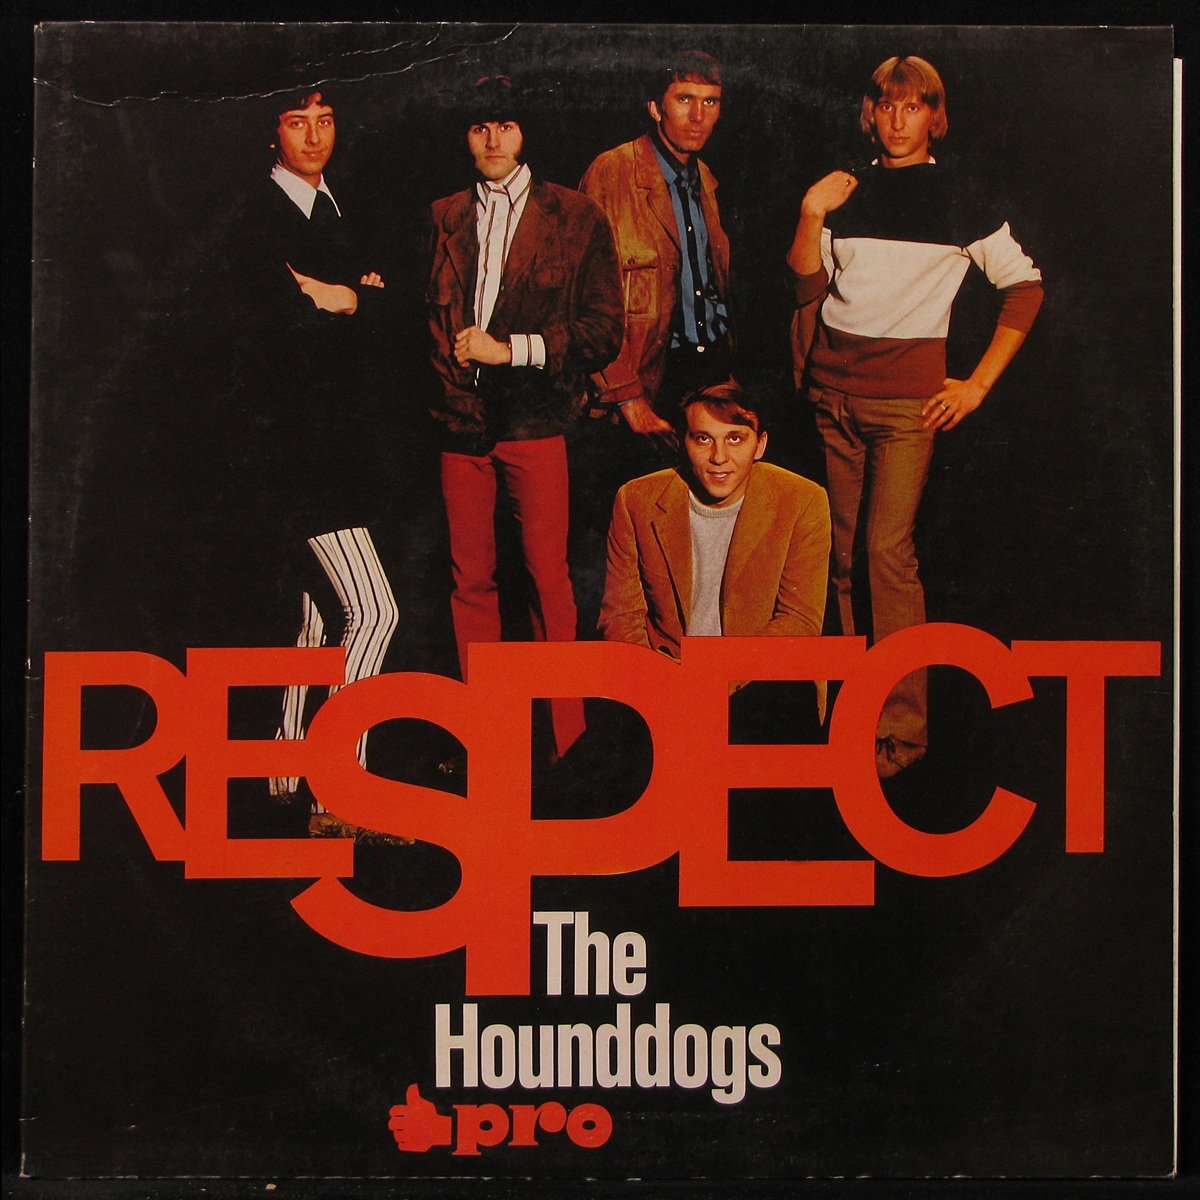 LP Hounddogs — Respect фото